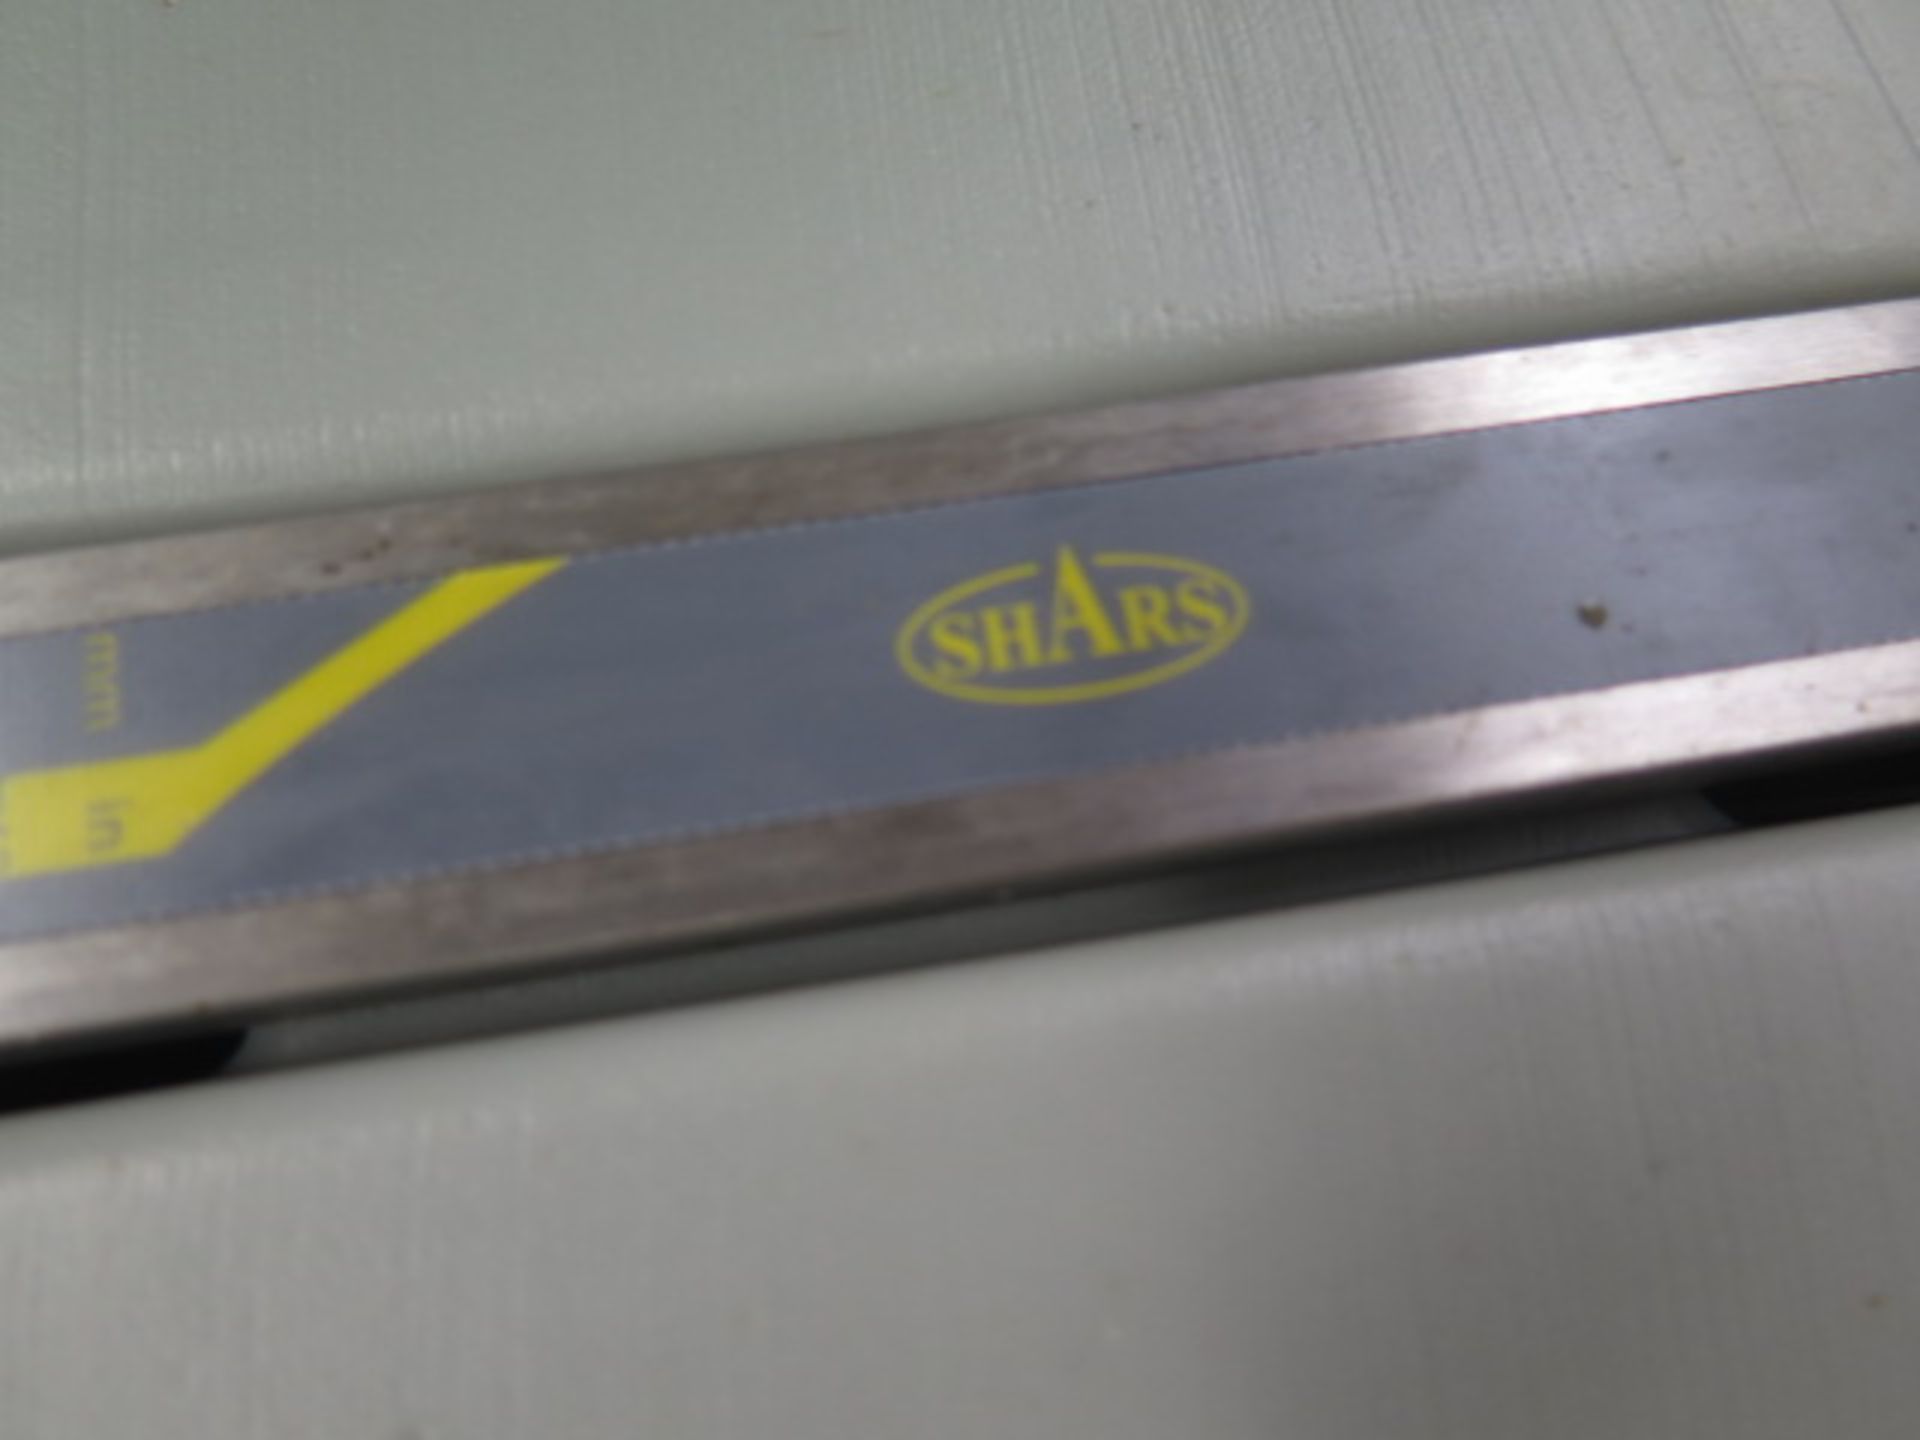 Shars 12" Digital Height Gage (SOLD AS-IS - NO WARRANTY) - Image 4 of 4